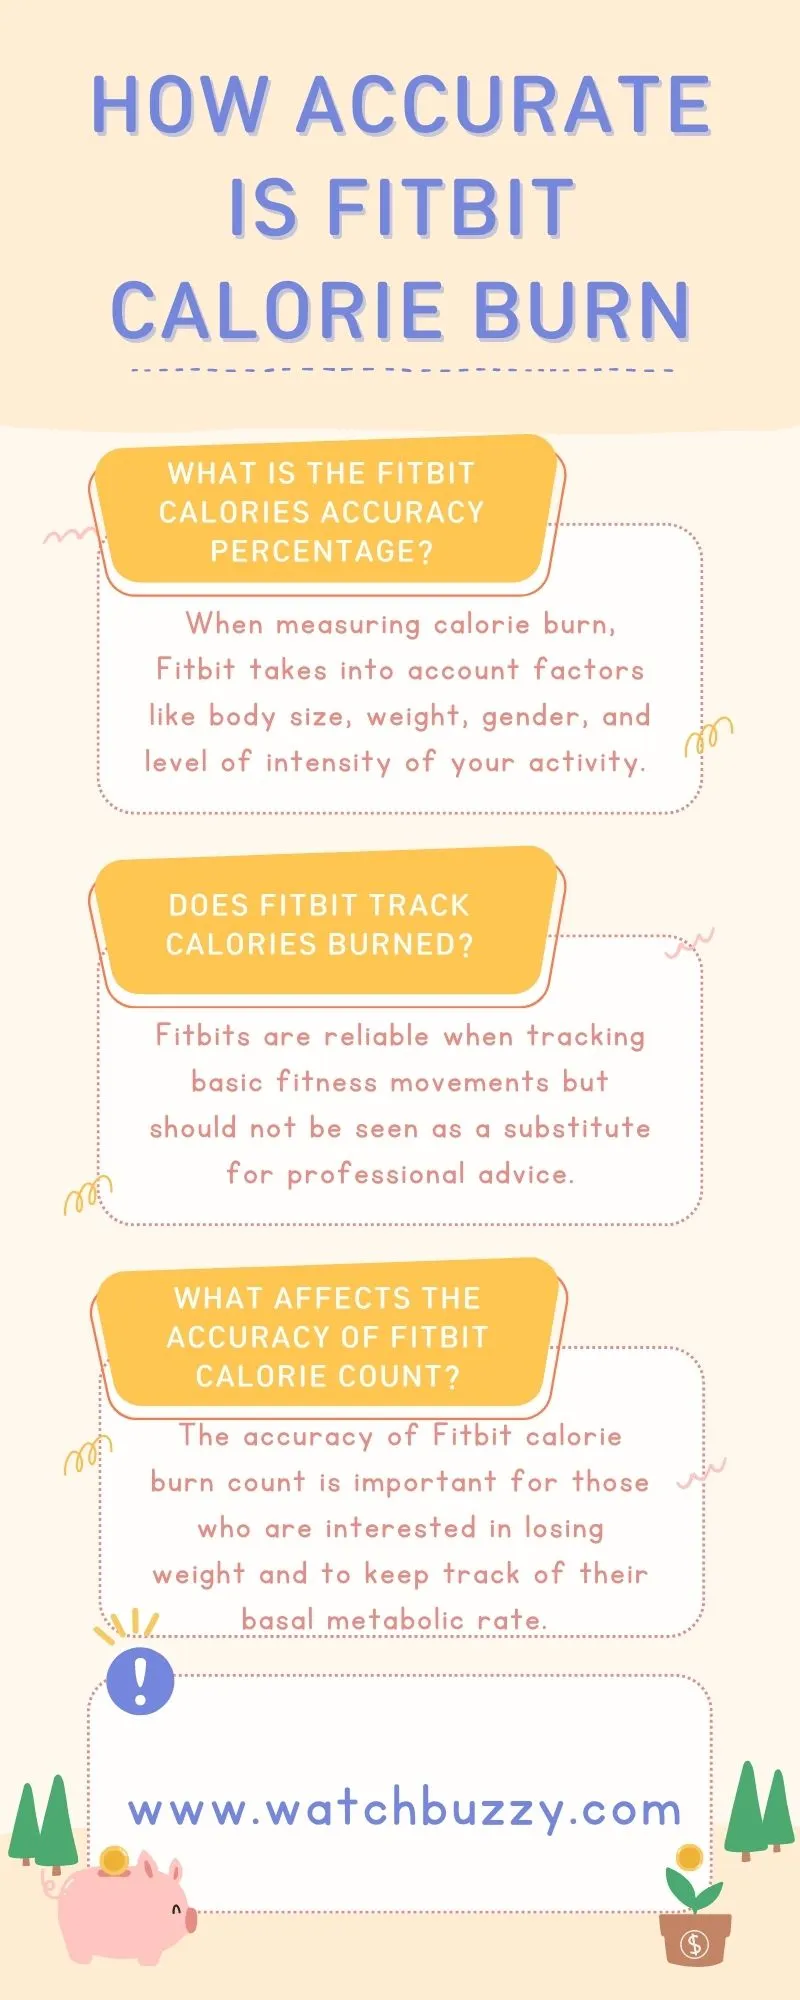 How Accurate is Fitbit Calorie Burn